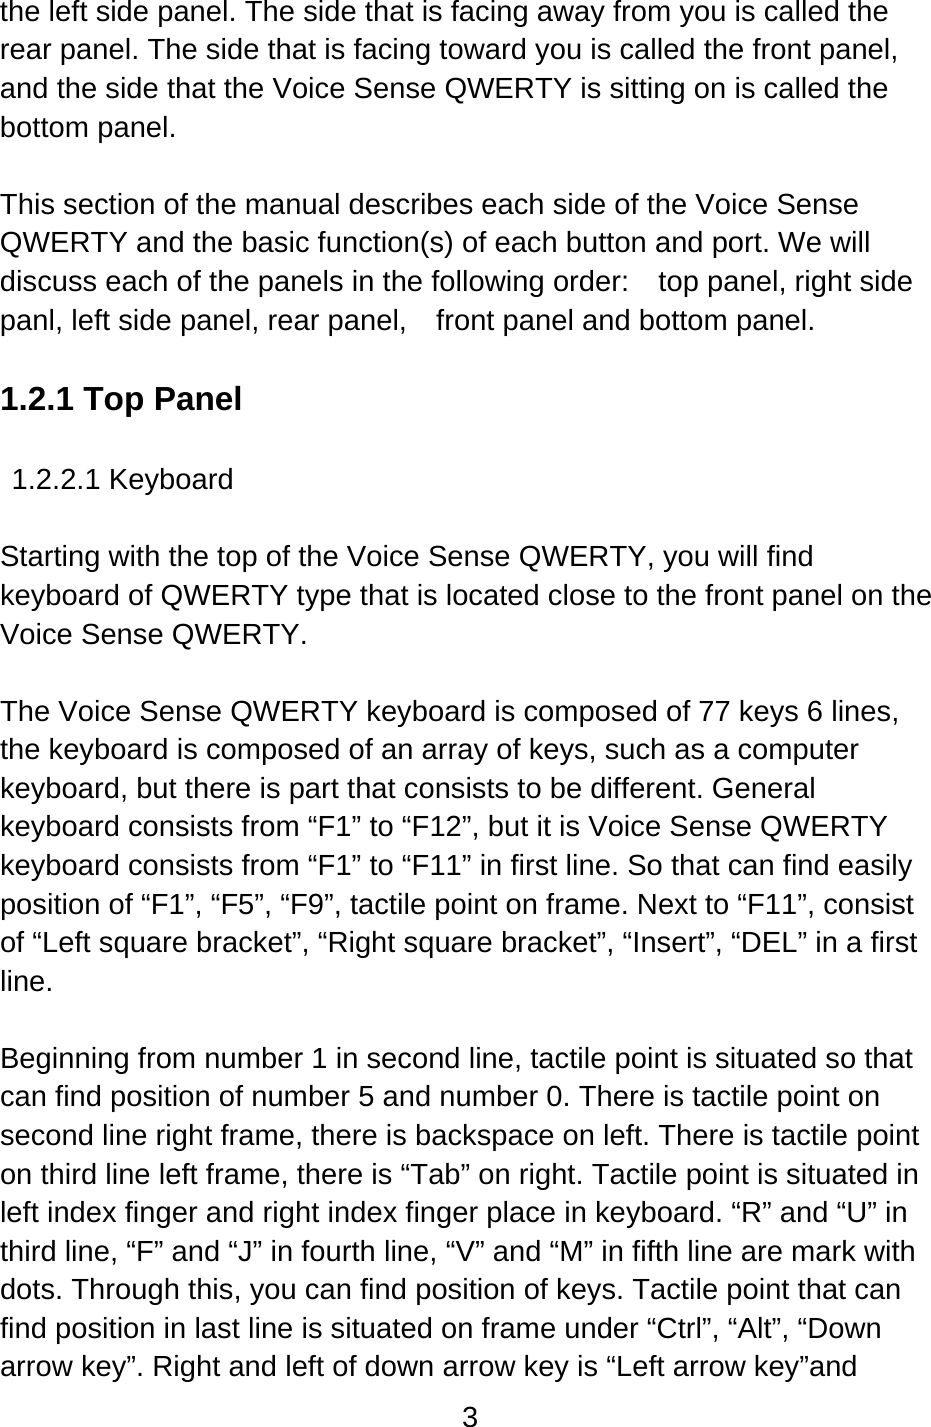 3  the left side panel. The side that is facing away from you is called the rear panel. The side that is facing toward you is called the front panel, and the side that the Voice Sense QWERTY is sitting on is called the bottom panel.  This section of the manual describes each side of the Voice Sense QWERTY and the basic function(s) of each button and port. We will discuss each of the panels in the following order:  top panel, right side panl, left side panel, rear panel,    front panel and bottom panel.  1.2.1 Top Panel  1.2.2.1 Keyboard  Starting with the top of the Voice Sense QWERTY, you will find keyboard of QWERTY type that is located close to the front panel on the Voice Sense QWERTY.  The Voice Sense QWERTY keyboard is composed of 77 keys 6 lines, the keyboard is composed of an array of keys, such as a computer keyboard, but there is part that consists to be different. General keyboard consists from “F1” to “F12”, but it is Voice Sense QWERTY keyboard consists from “F1” to “F11” in first line. So that can find easily position of “F1”, “F5”, “F9”, tactile point on frame. Next to “F11”, consist of “Left square bracket”, “Right square bracket”, “Insert”, “DEL” in a first line.   Beginning from number 1 in second line, tactile point is situated so that can find position of number 5 and number 0. There is tactile point on second line right frame, there is backspace on left. There is tactile point on third line left frame, there is “Tab” on right. Tactile point is situated in left index finger and right index finger place in keyboard. “R” and “U” in third line, “F” and “J” in fourth line, “V” and “M” in fifth line are mark with dots. Through this, you can find position of keys. Tactile point that can find position in last line is situated on frame under “Ctrl”, “Alt”, “Down arrow key”. Right and left of down arrow key is “Left arrow key”and 